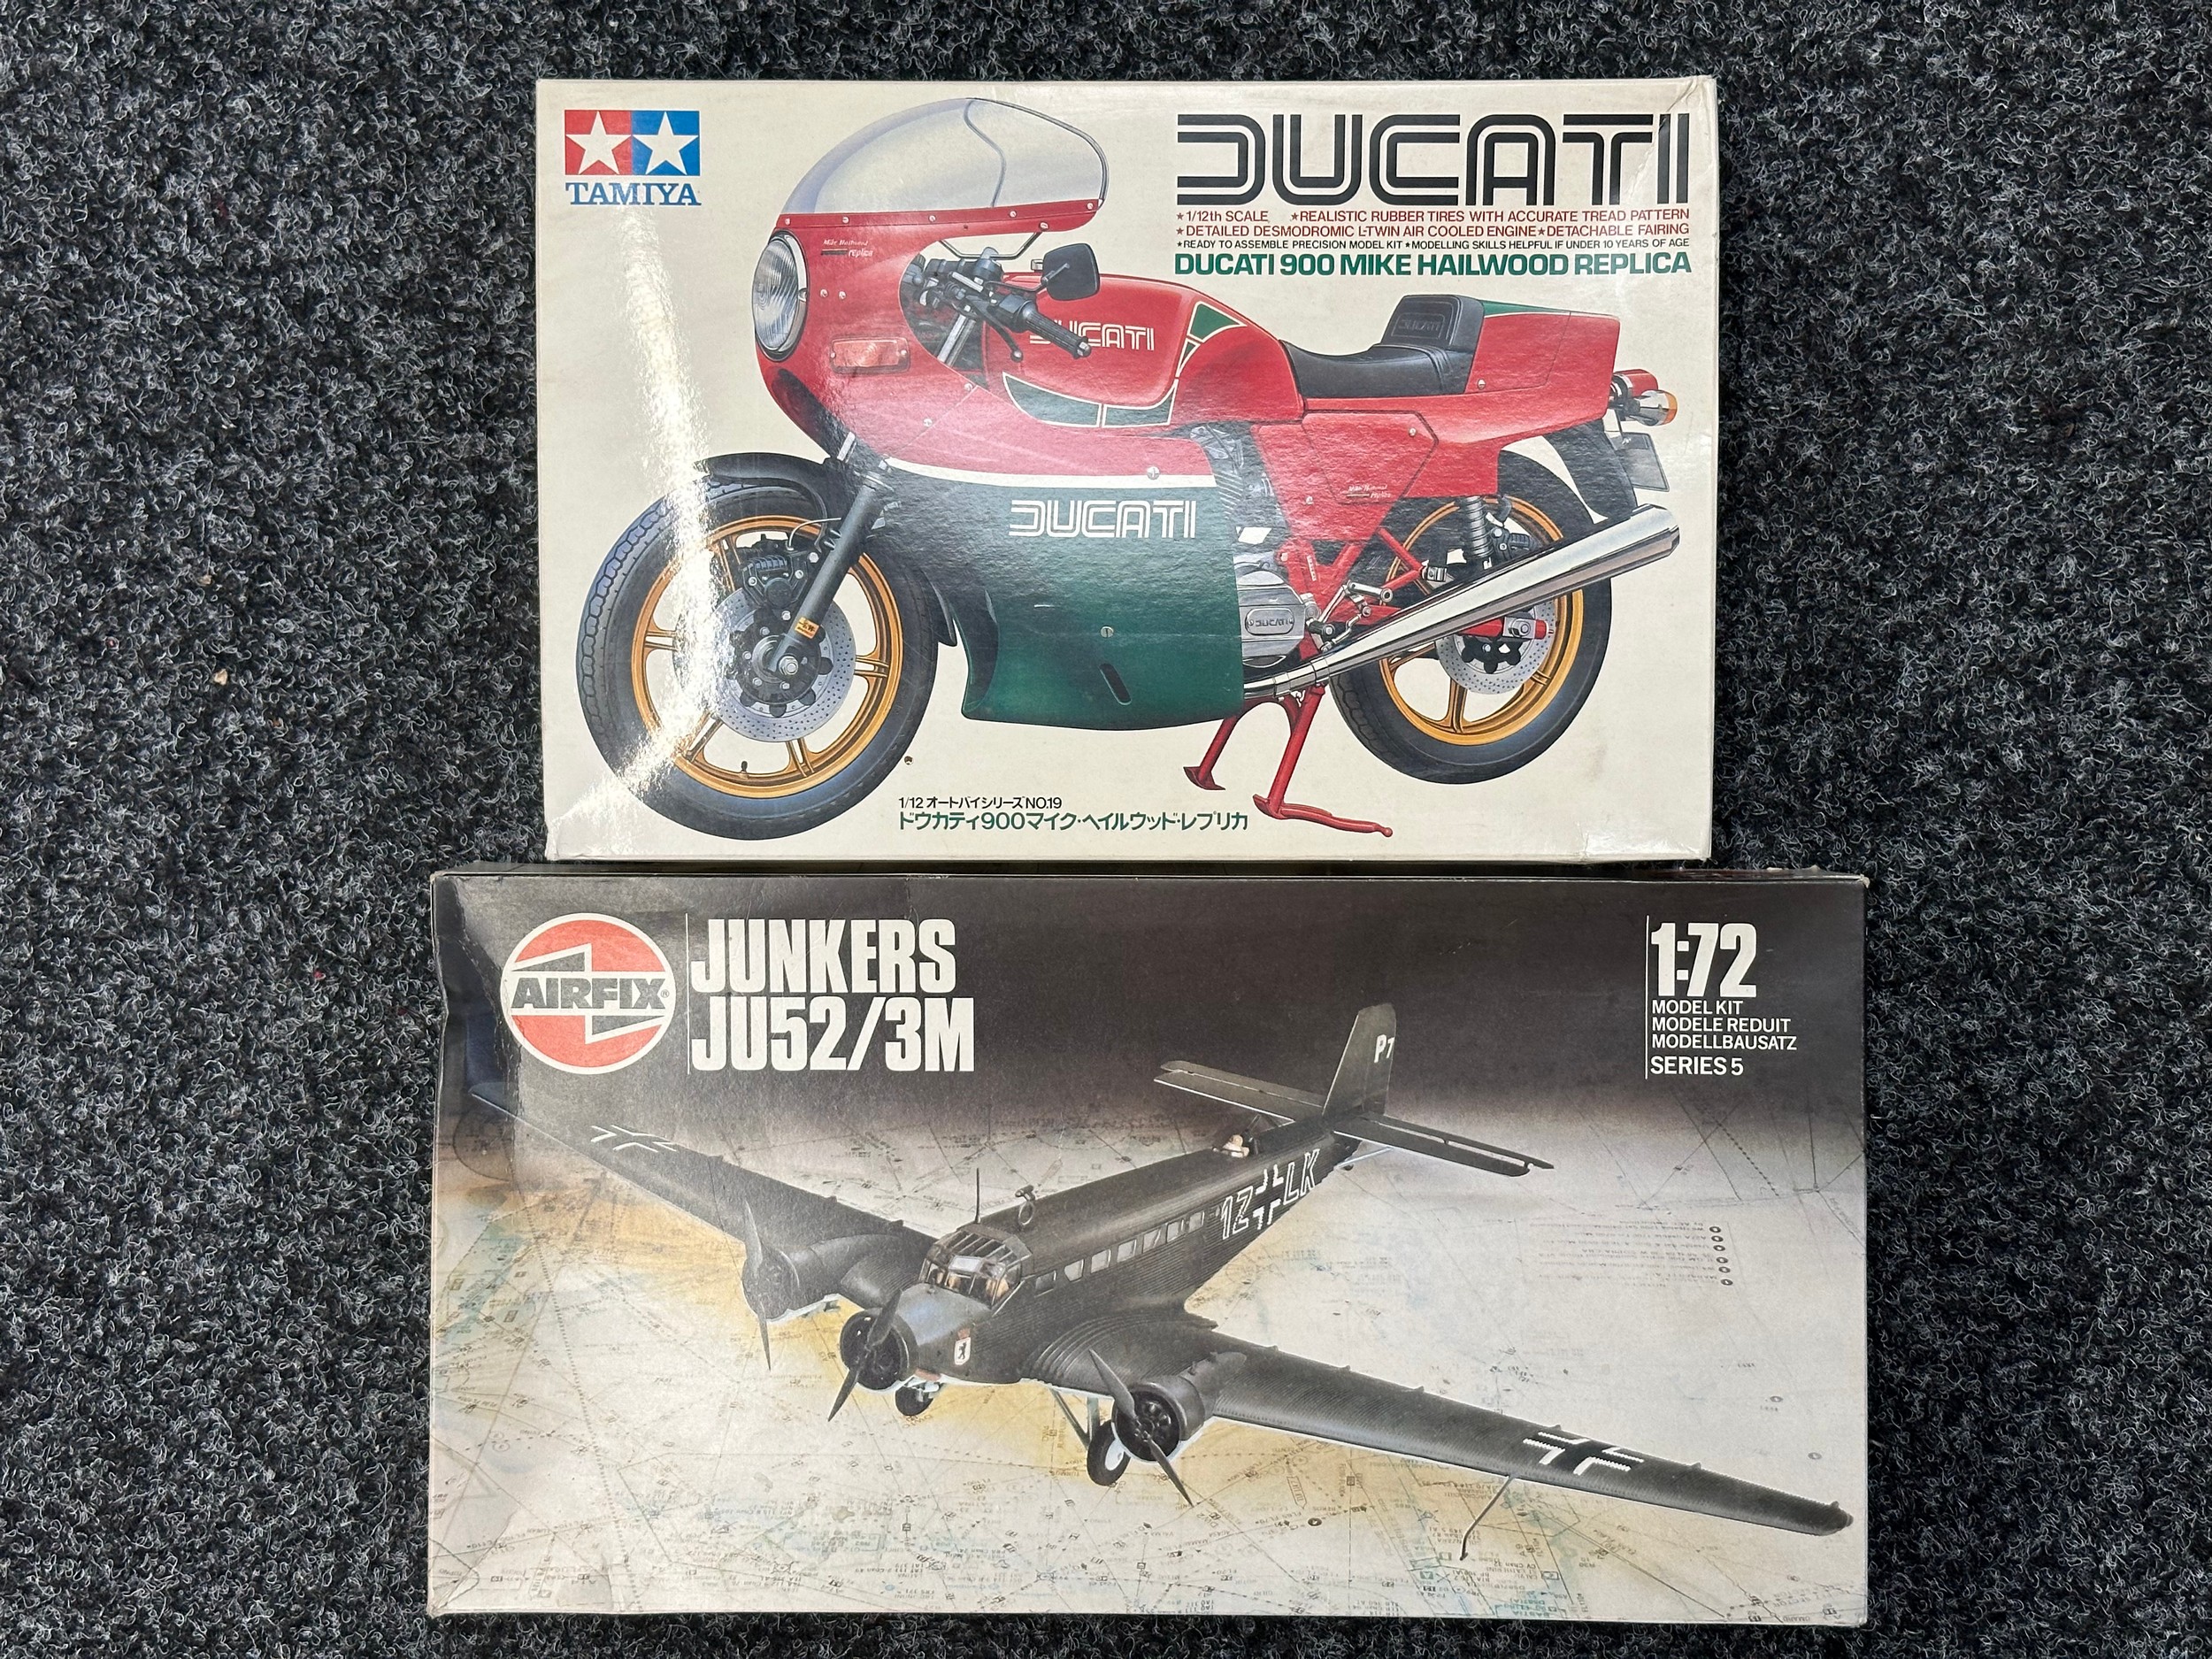 Model Construction kits: Tamiya Ducati 900 Mike Hailwood Replica Motorcycle 1/12th scale. Along with